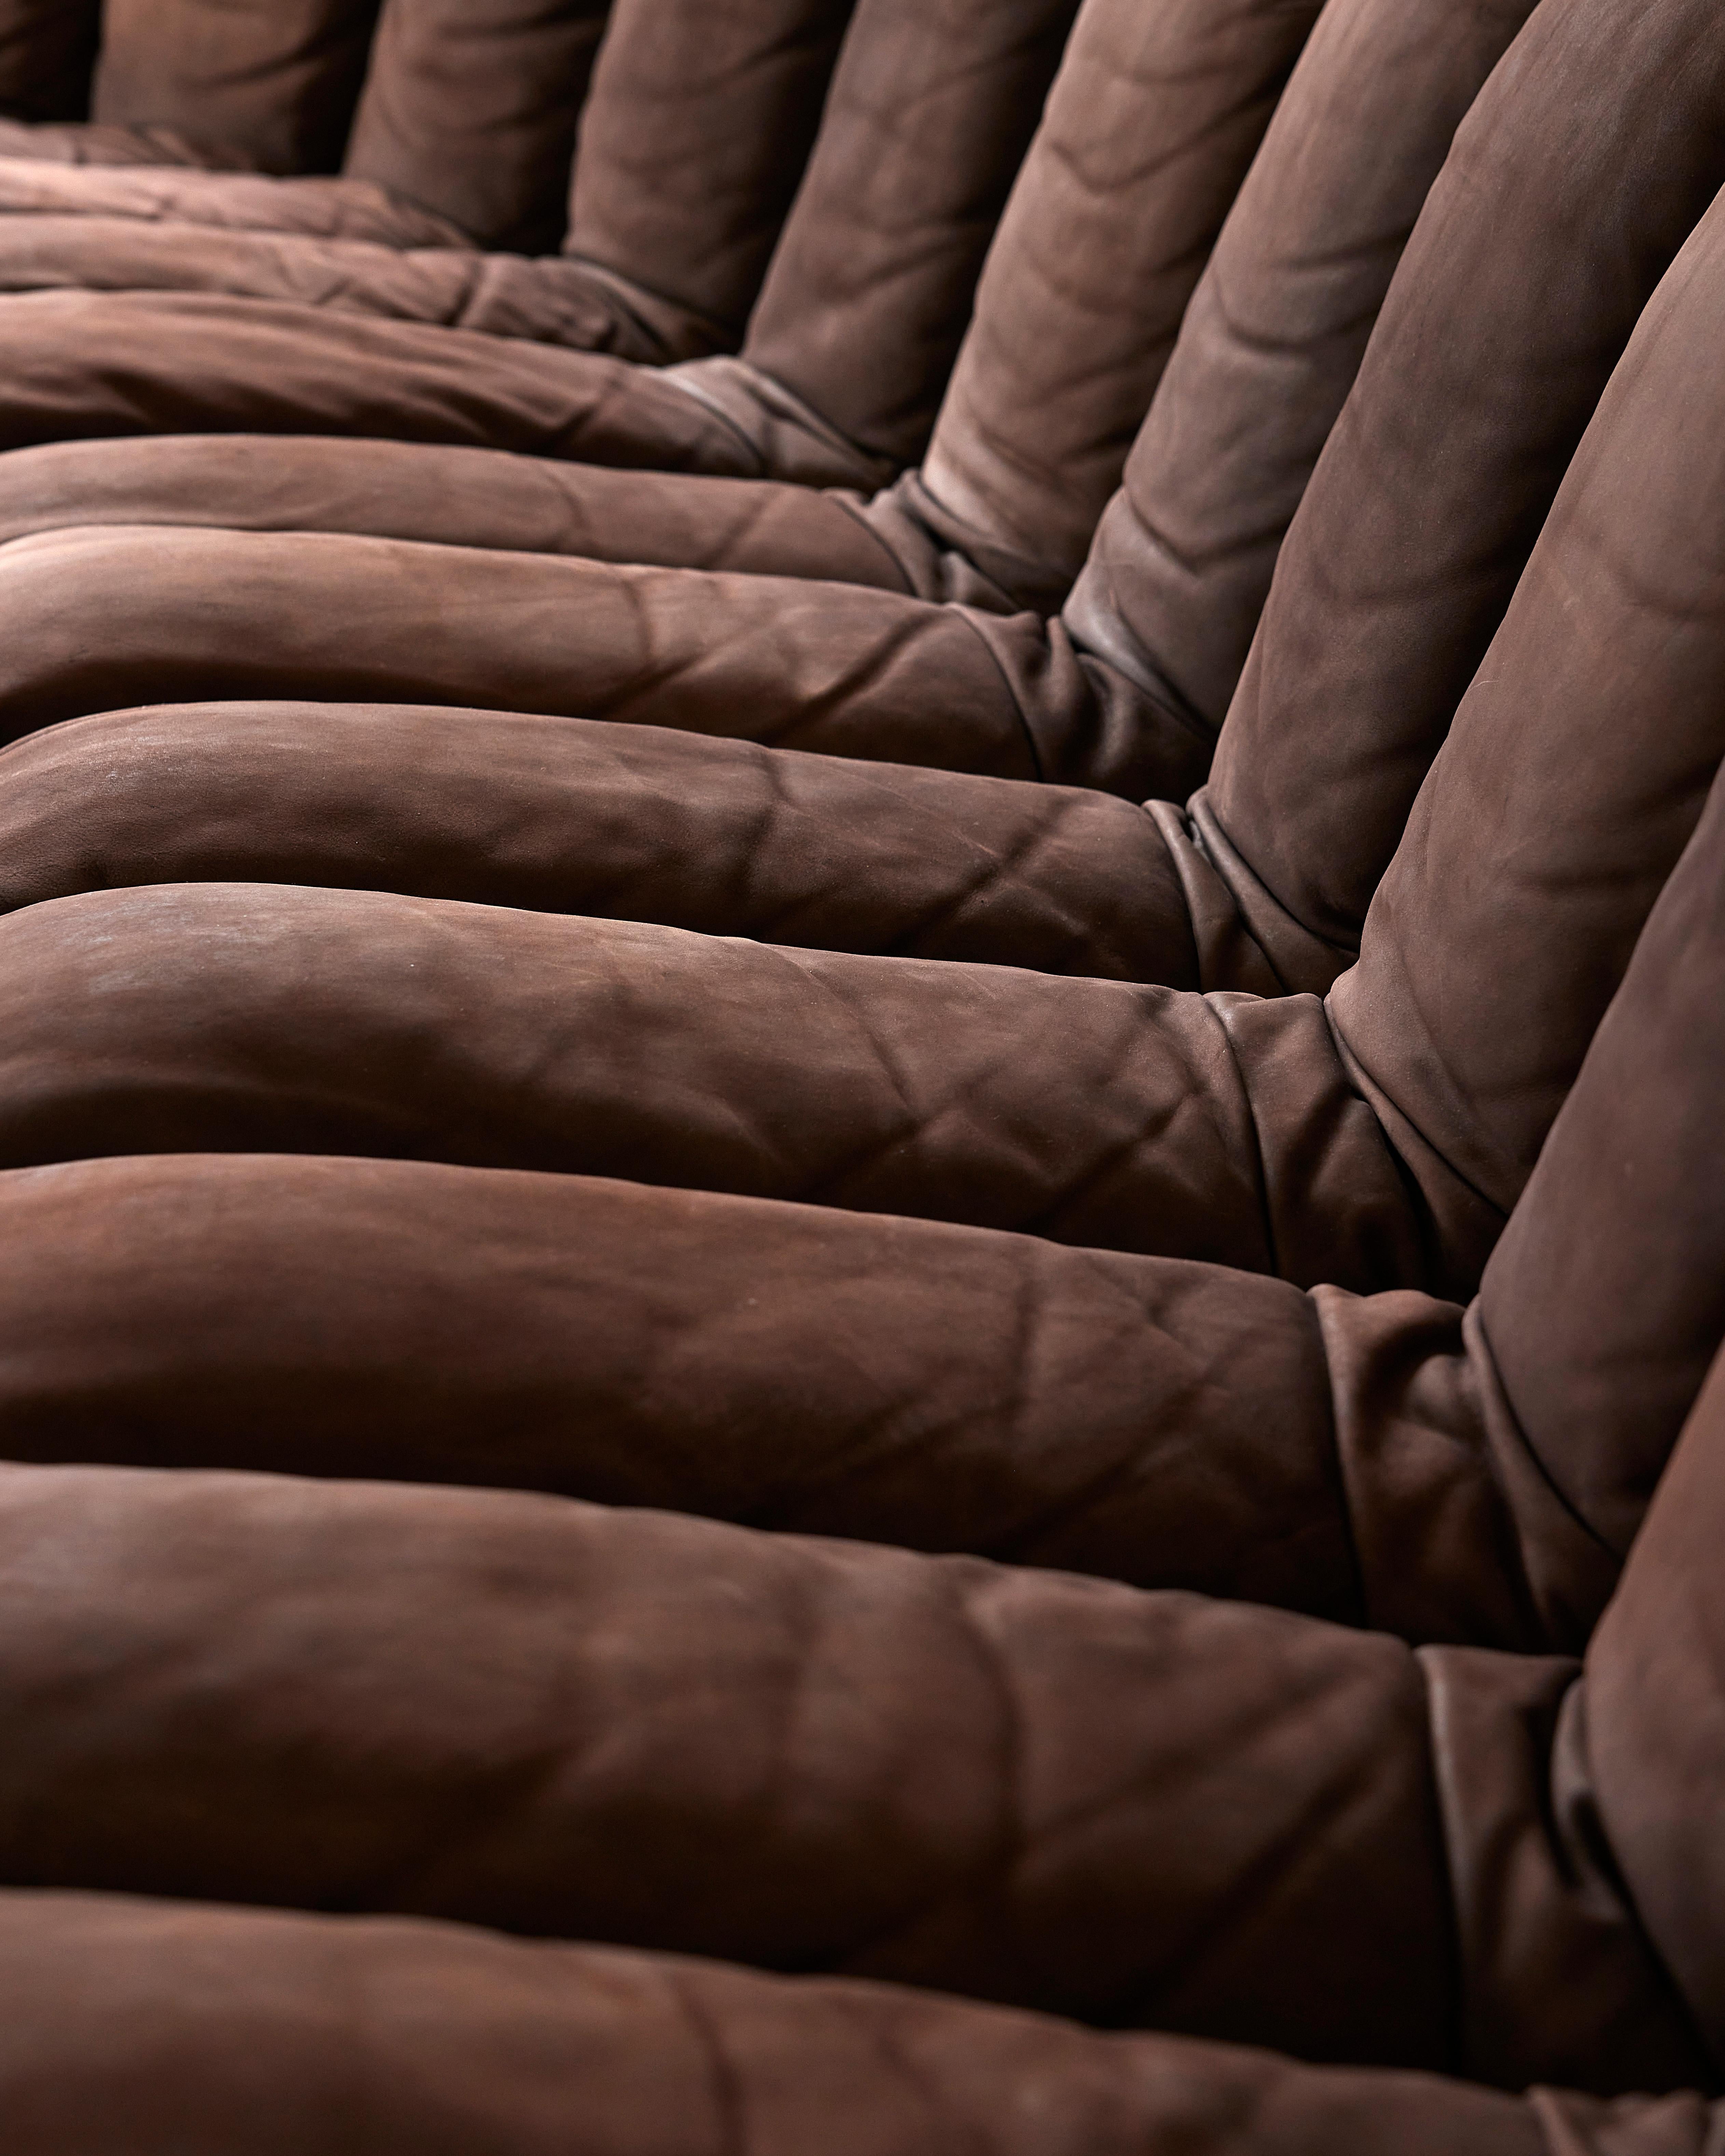 A huge size and an exceptional finish, discover our DS600 sofa!
If the design of the 70s often rhymes with plastic and mass production, the editor De Sede chooses for his creations the most exceptional leathers. Our example is dressed in a superb